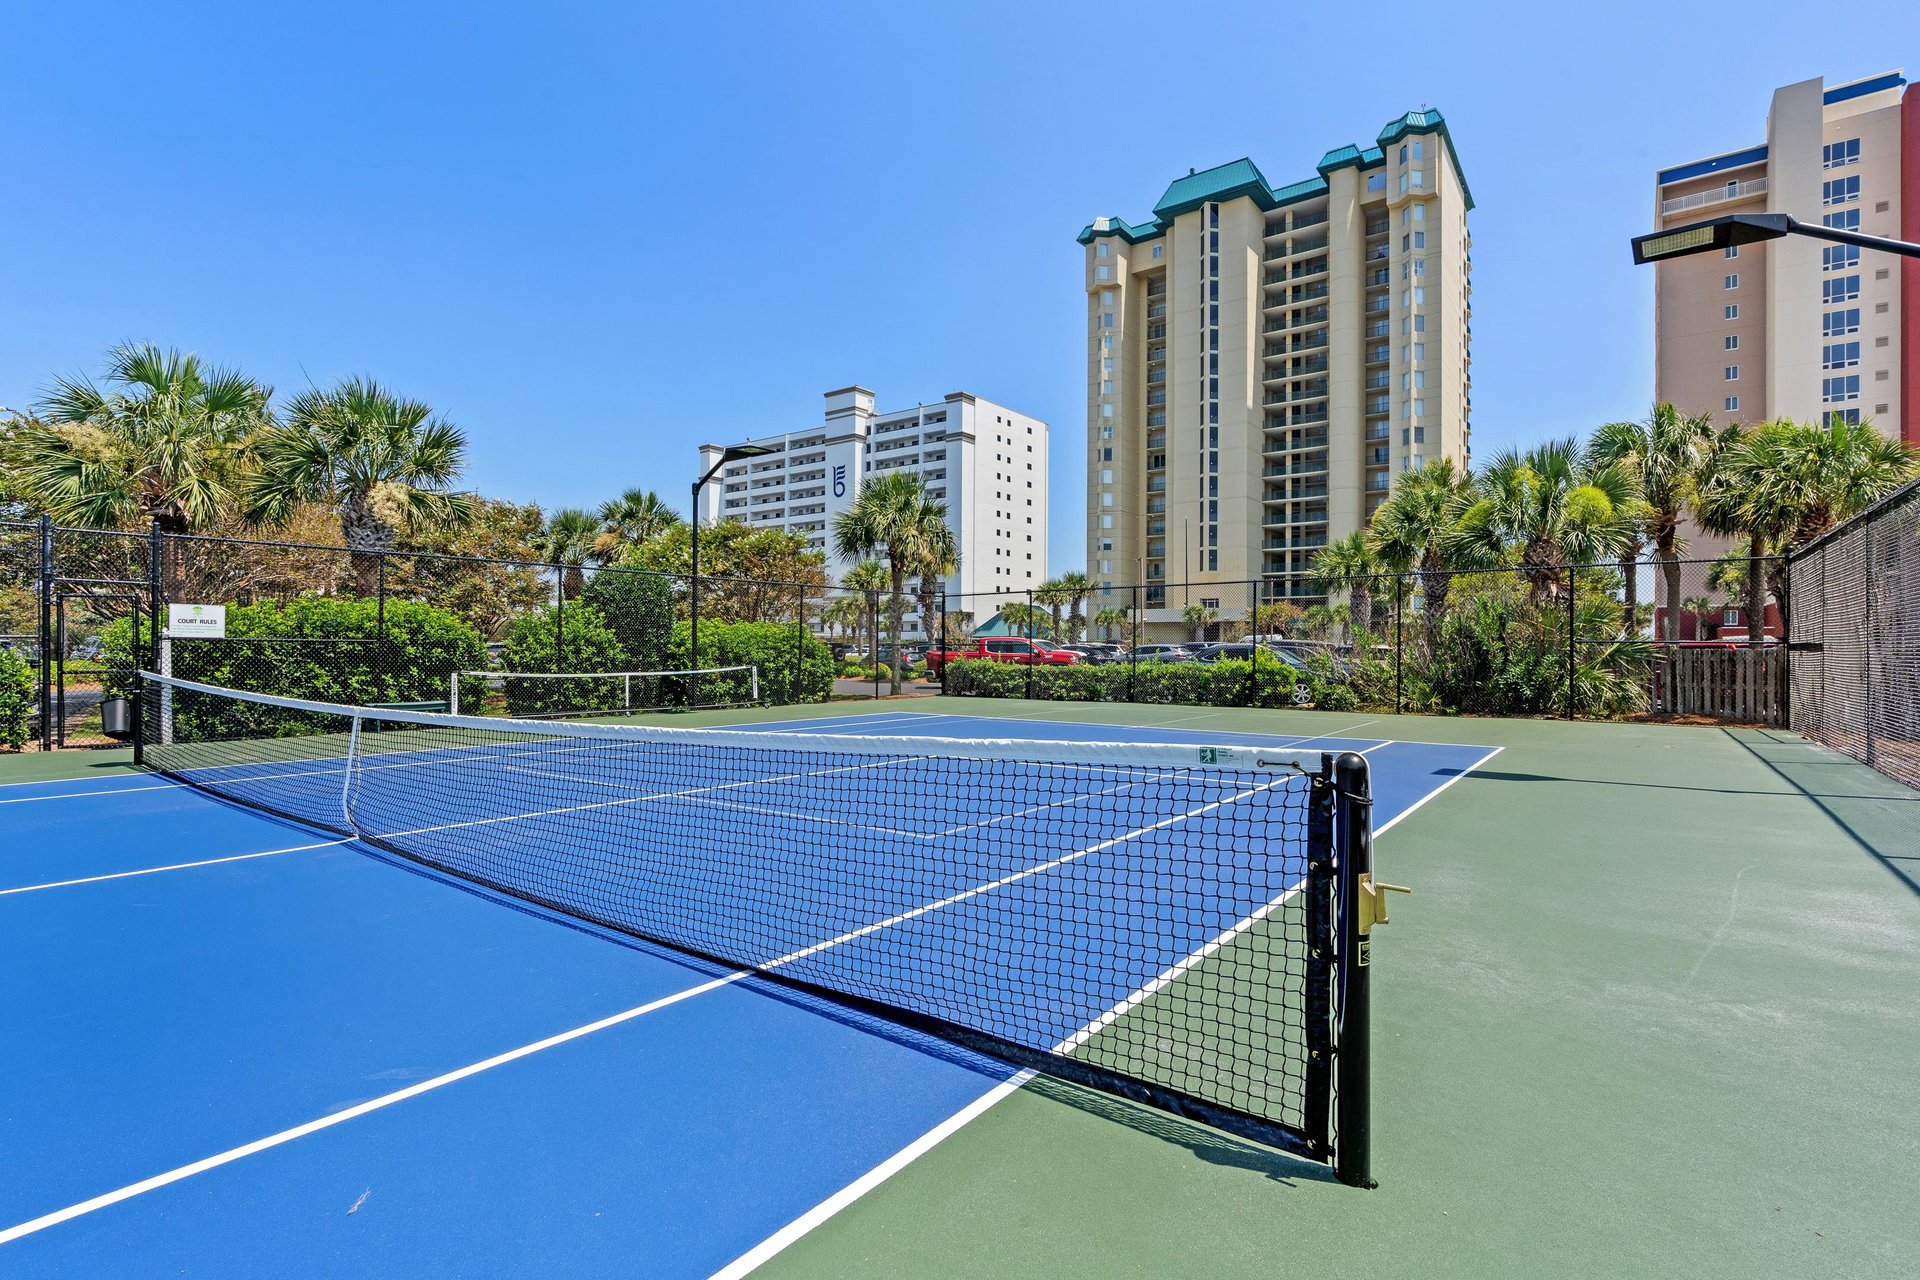 Pickle Ball and Tennis Courts